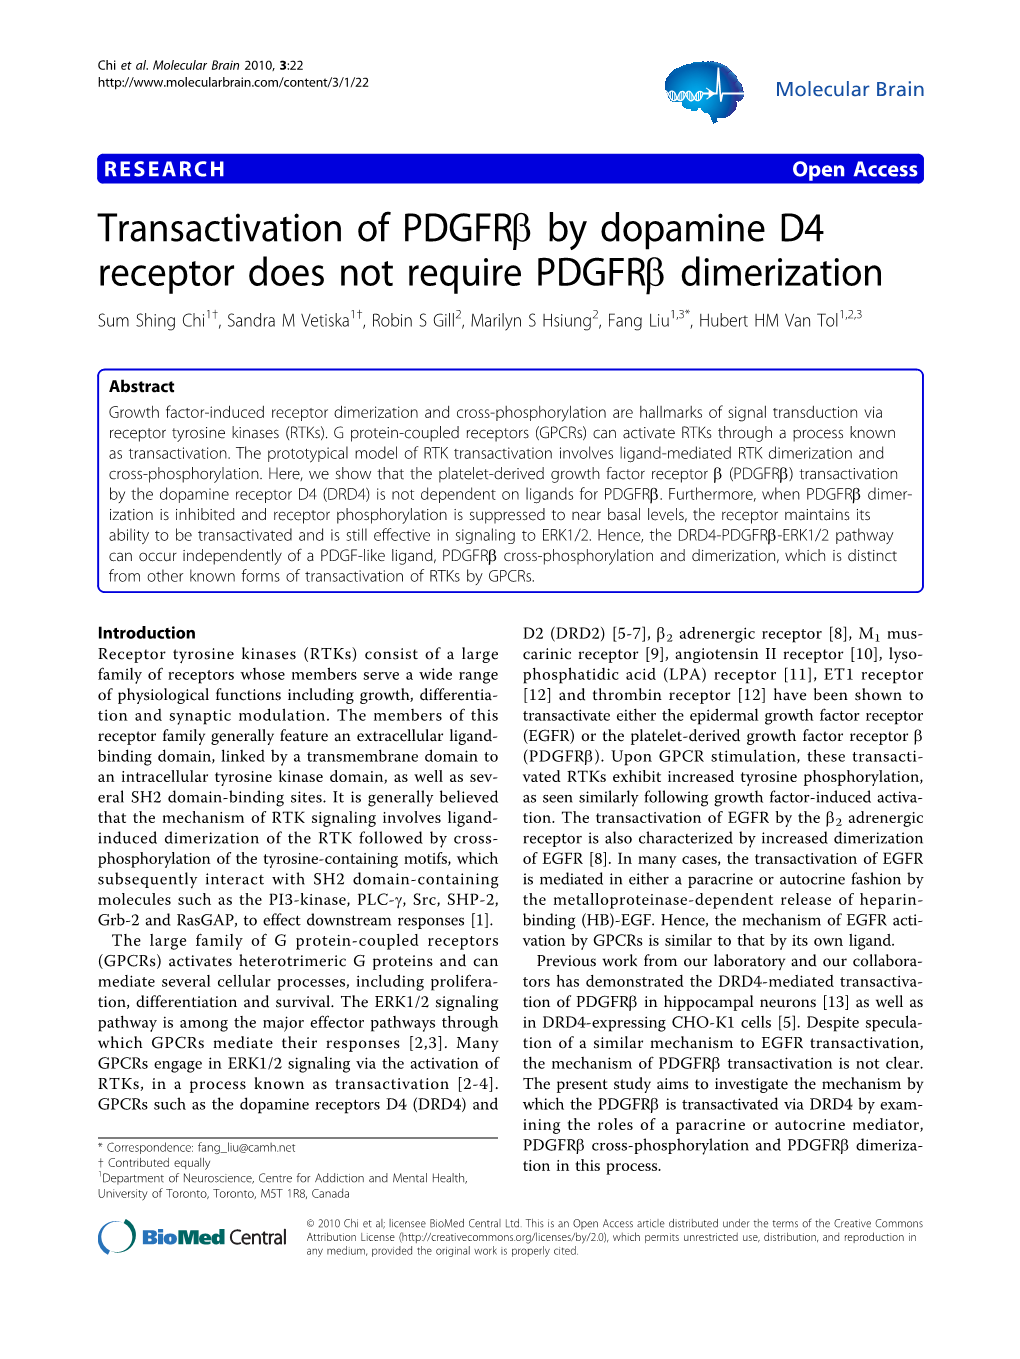 Transactivation of Pdgfrb by Dopamine D4 Receptor Does Not